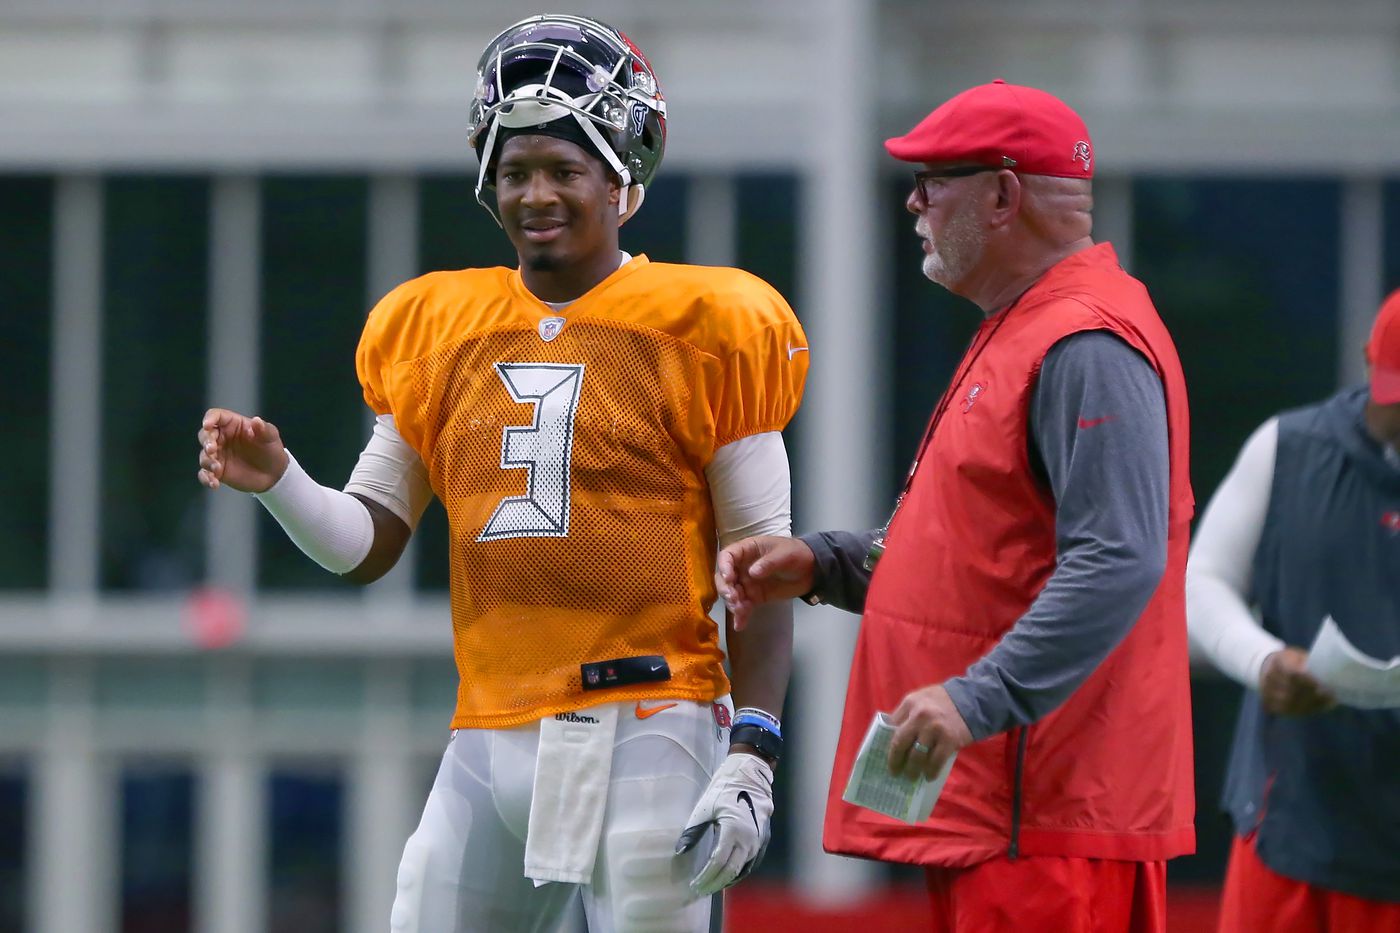 Buccaneers quarterback Jameis Winston and head coach Bruce Arians/via Cliff Welch/Icon Sportswire/Getty Images